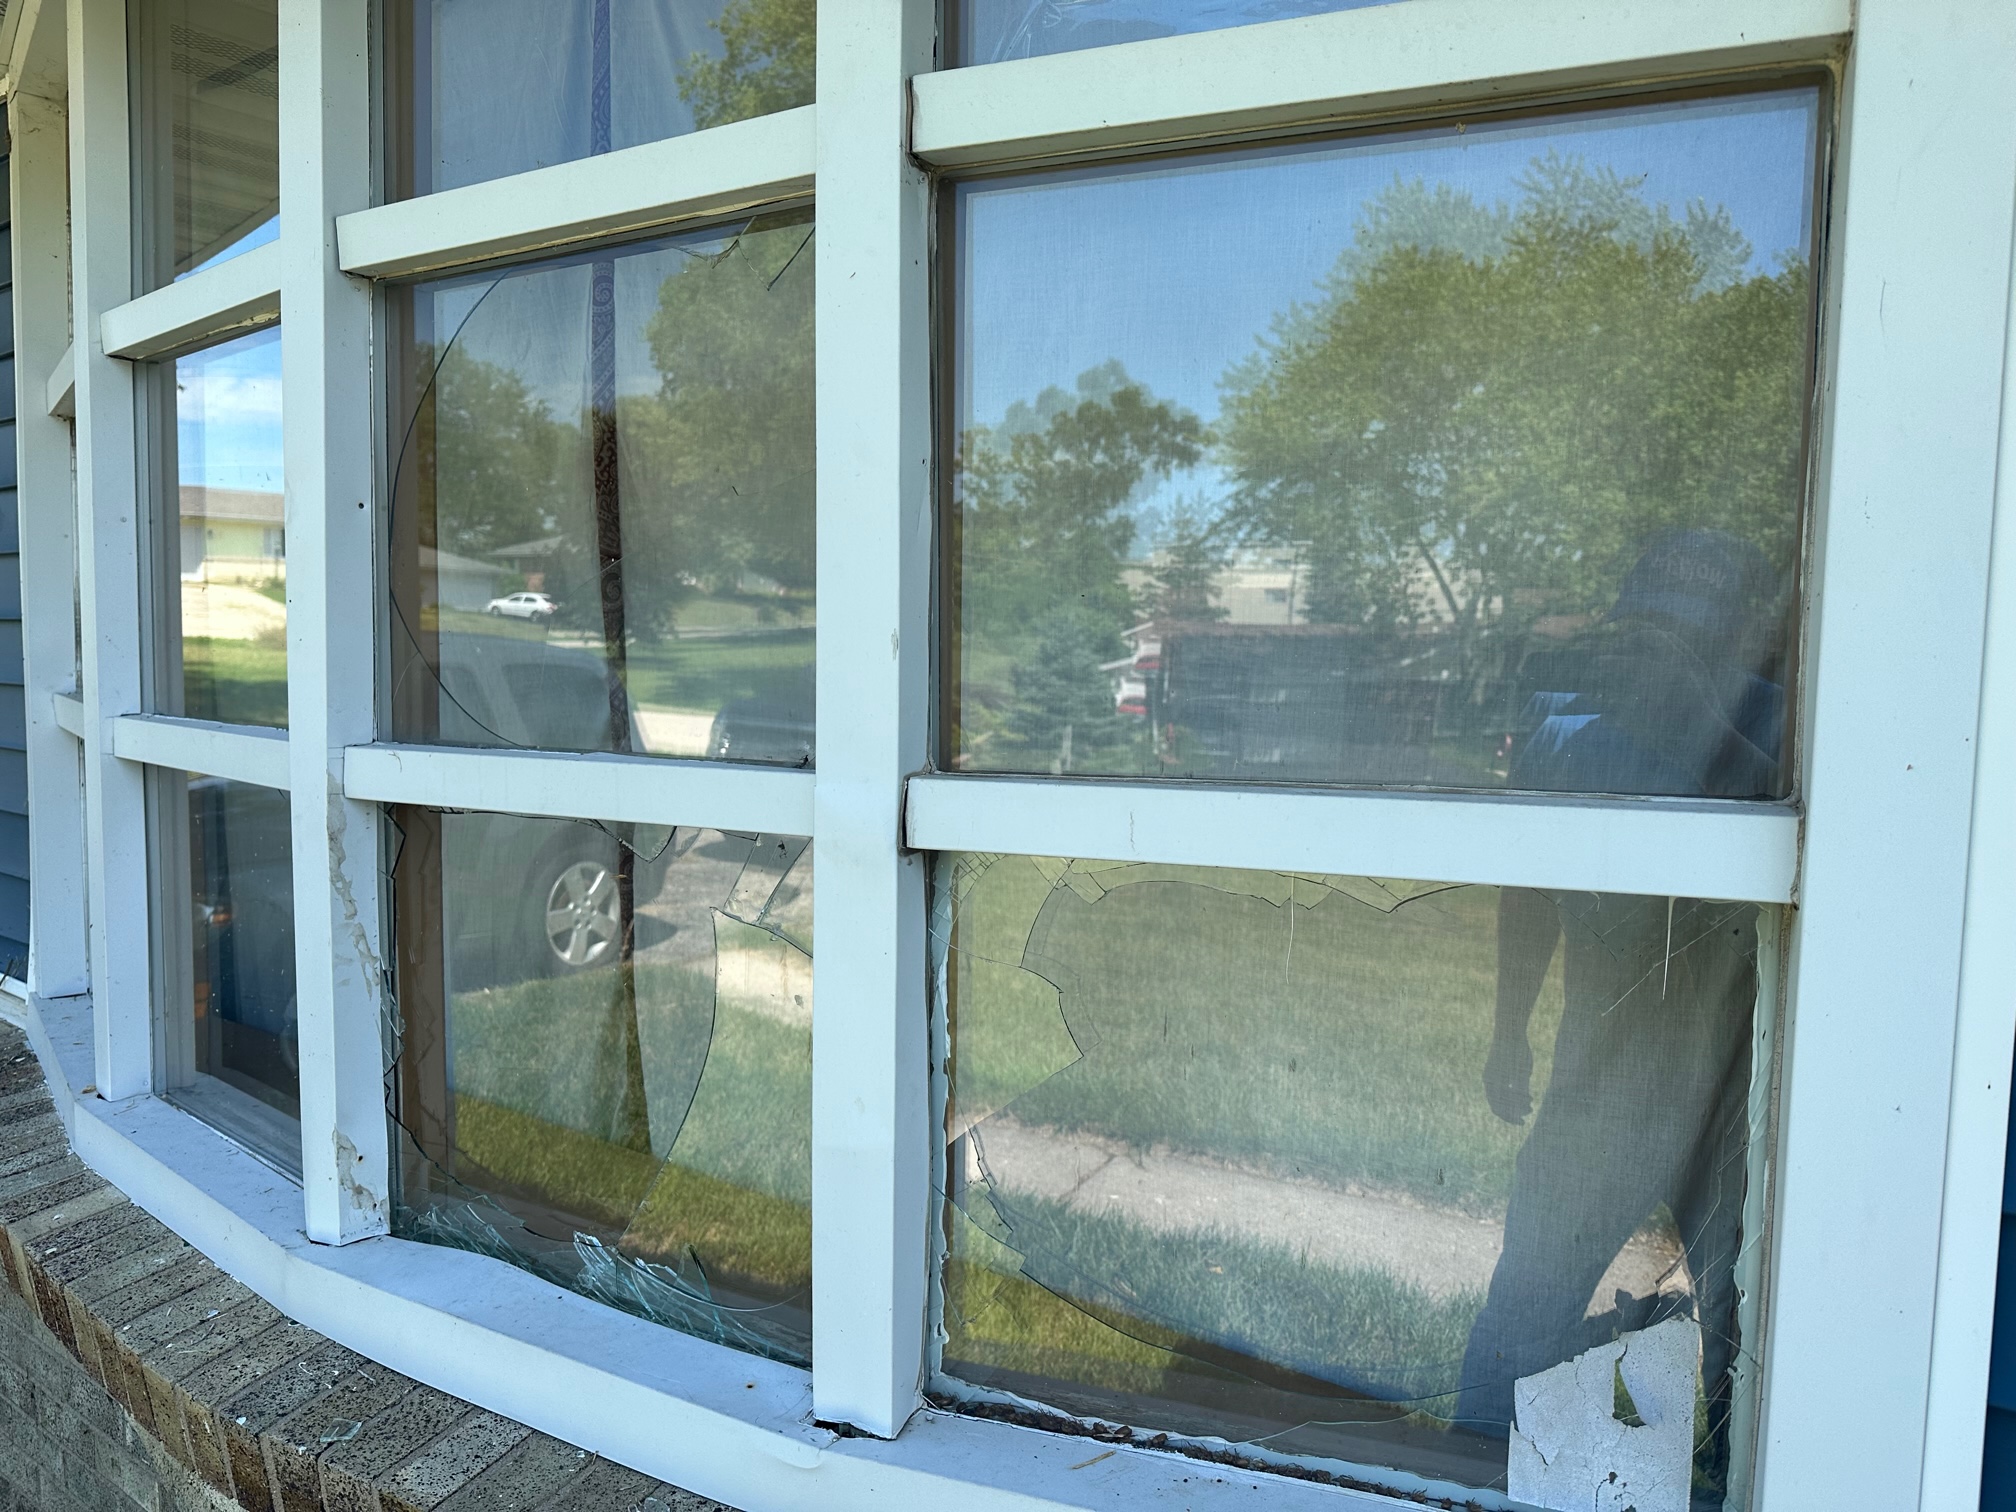 Professional from WOWFIX repairing a window by replacing the broken glass pane